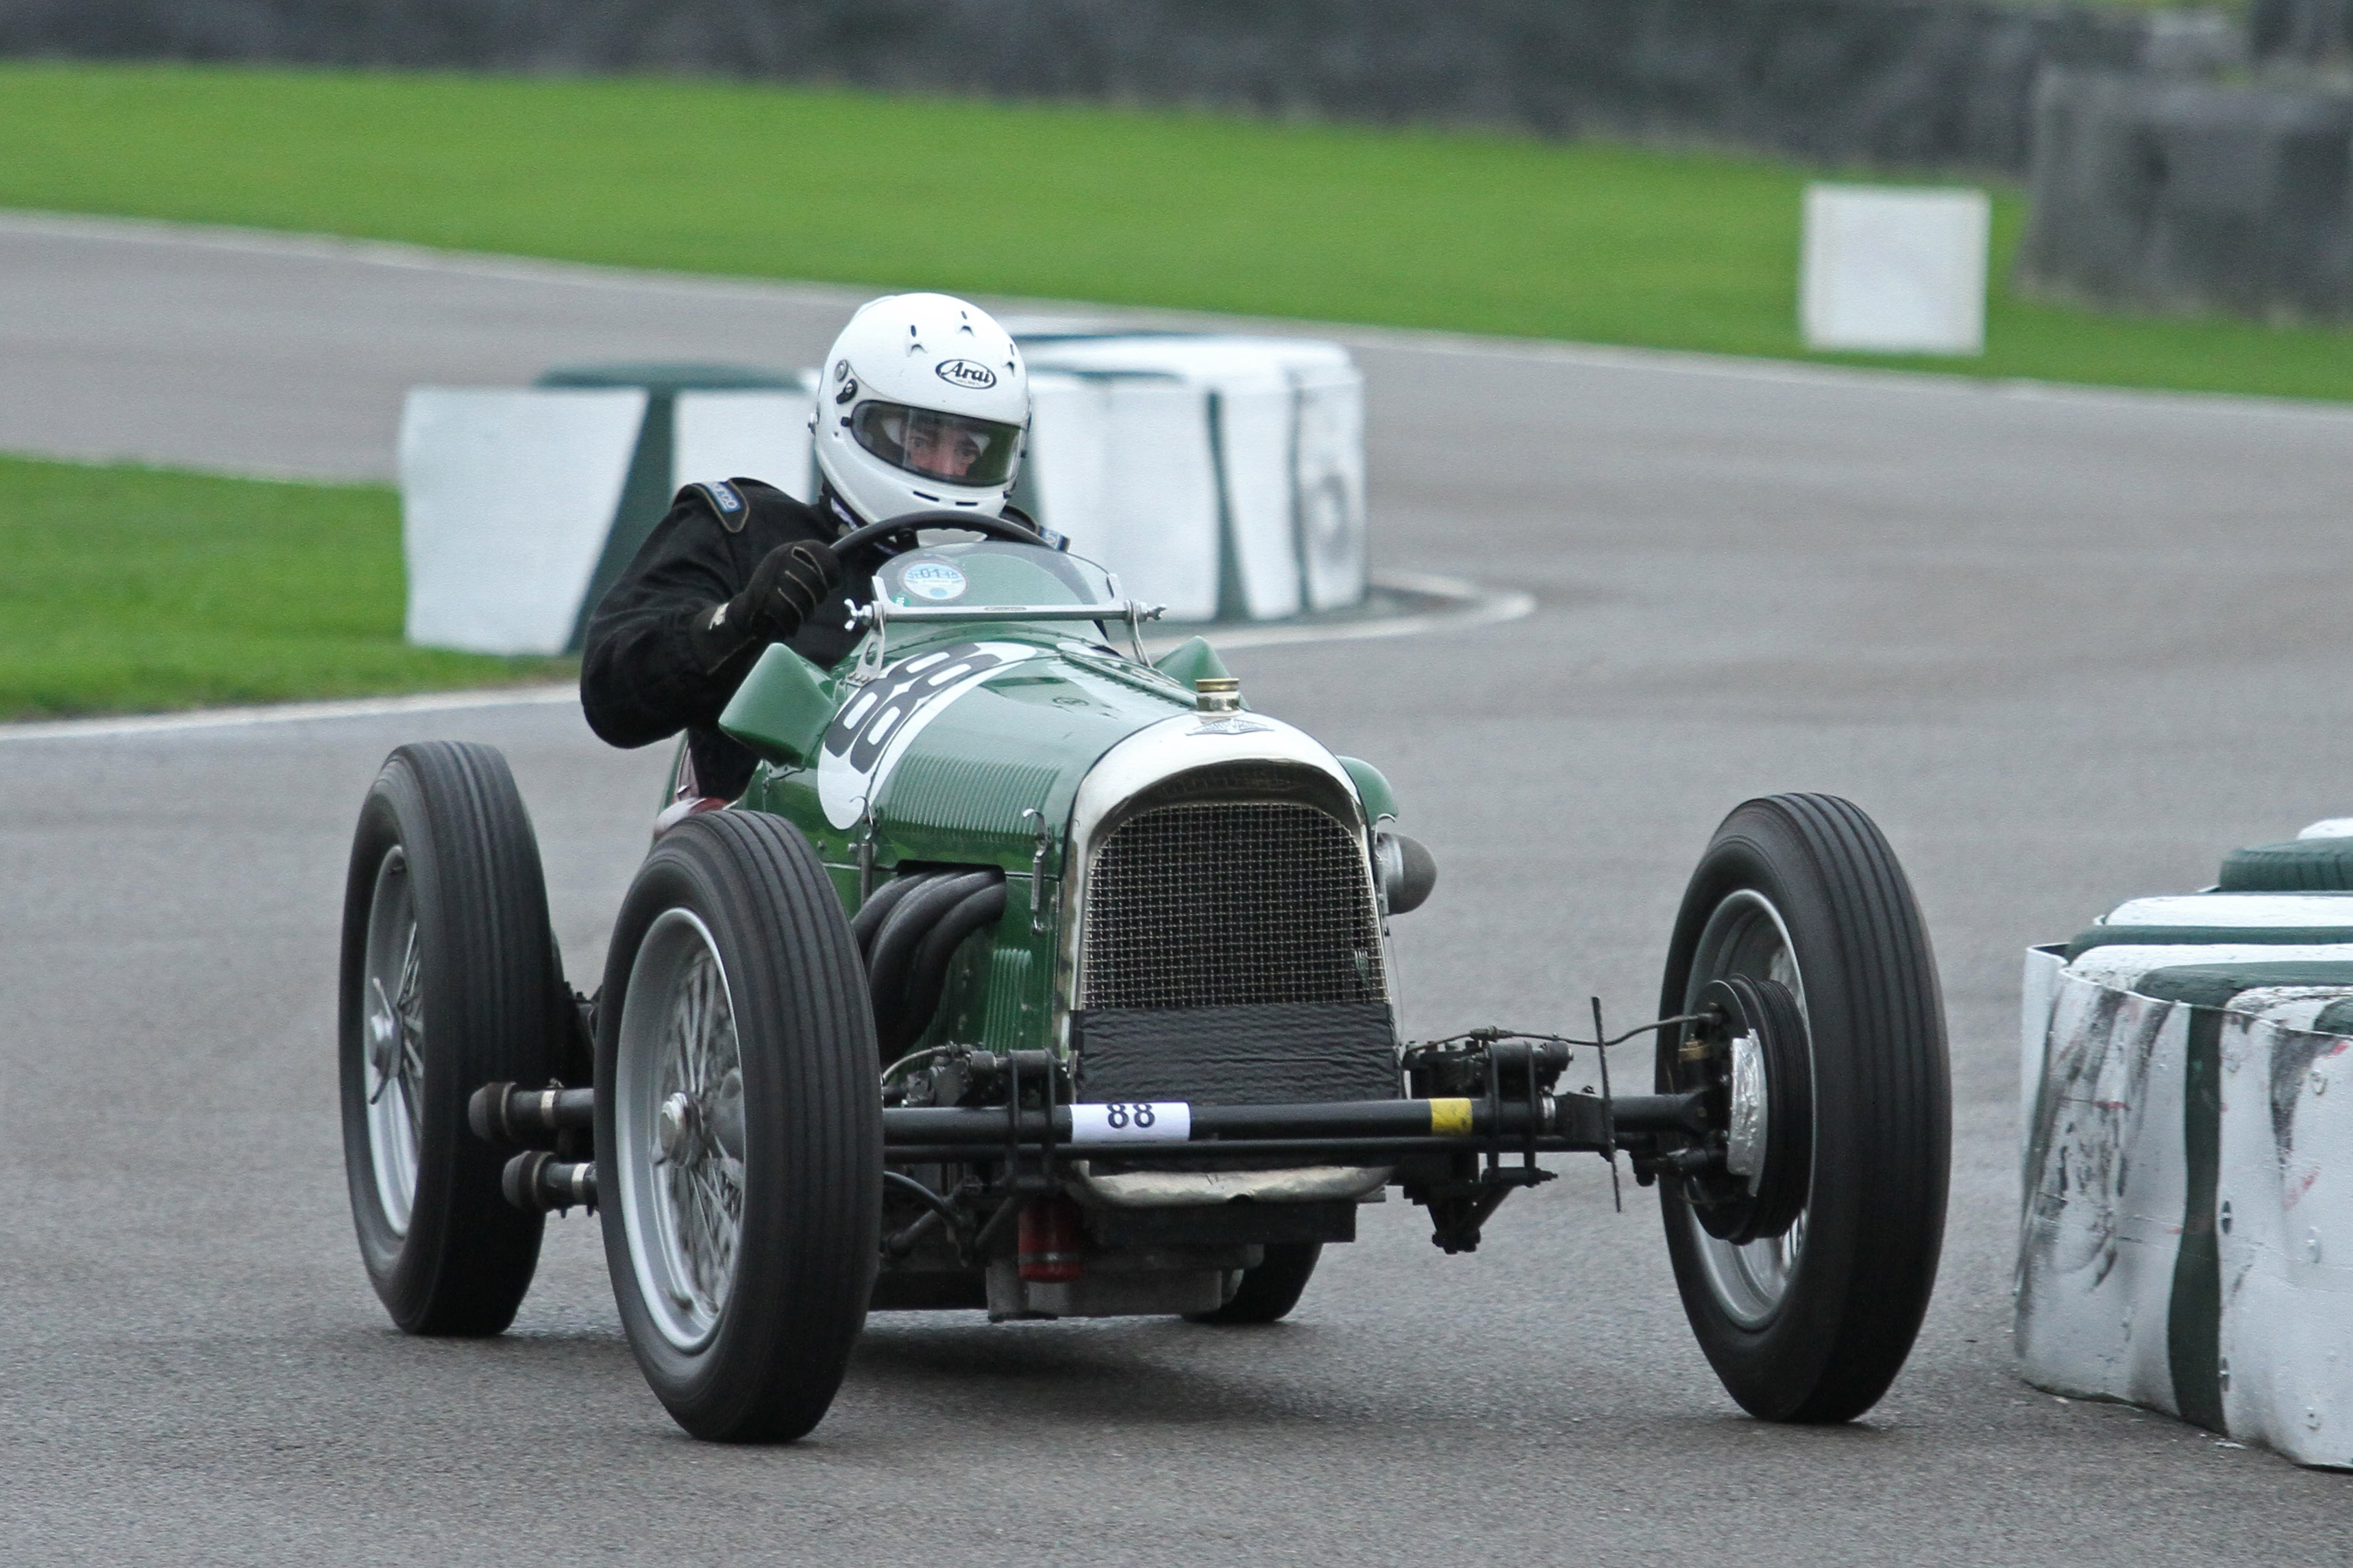 VSCC Speed Championship concludes with the Autumn Sprint at Goodwood this weekend cover